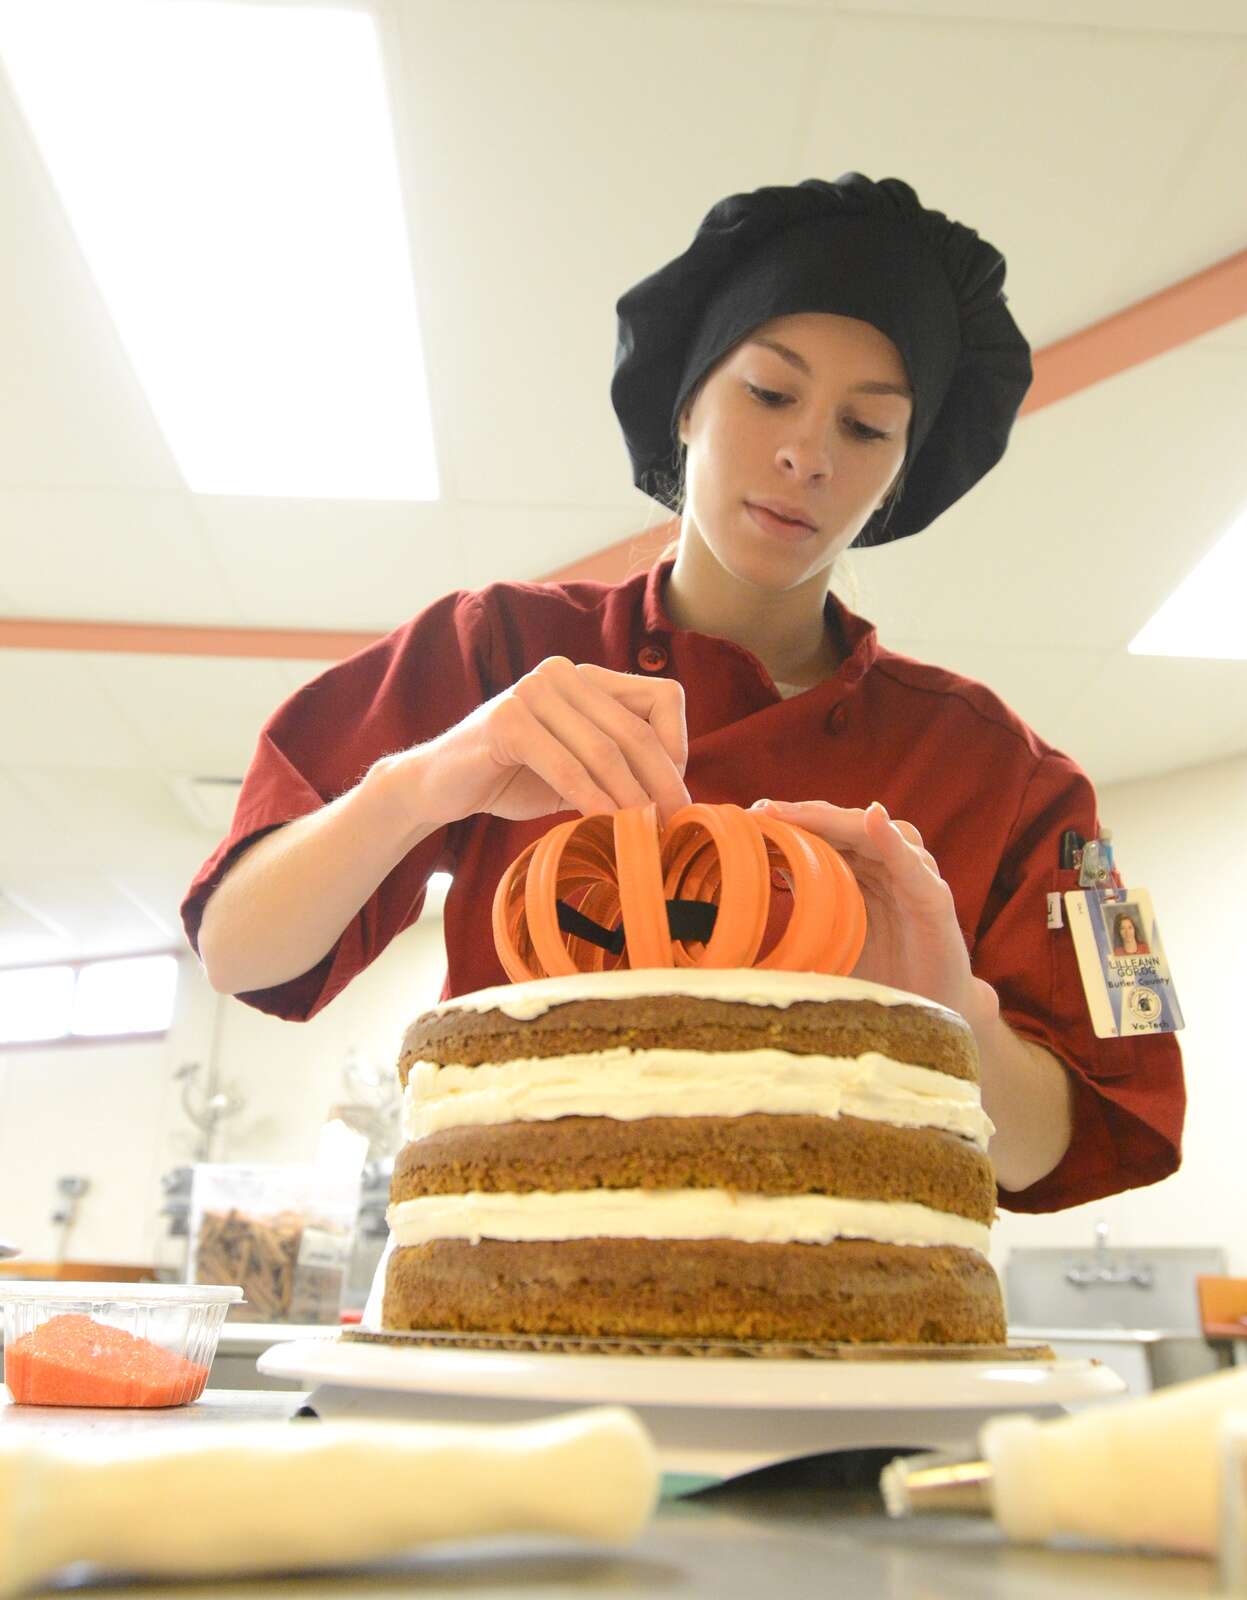 Butler County Area Vocational-Technical School culinary arts student makes a pumpkin cake